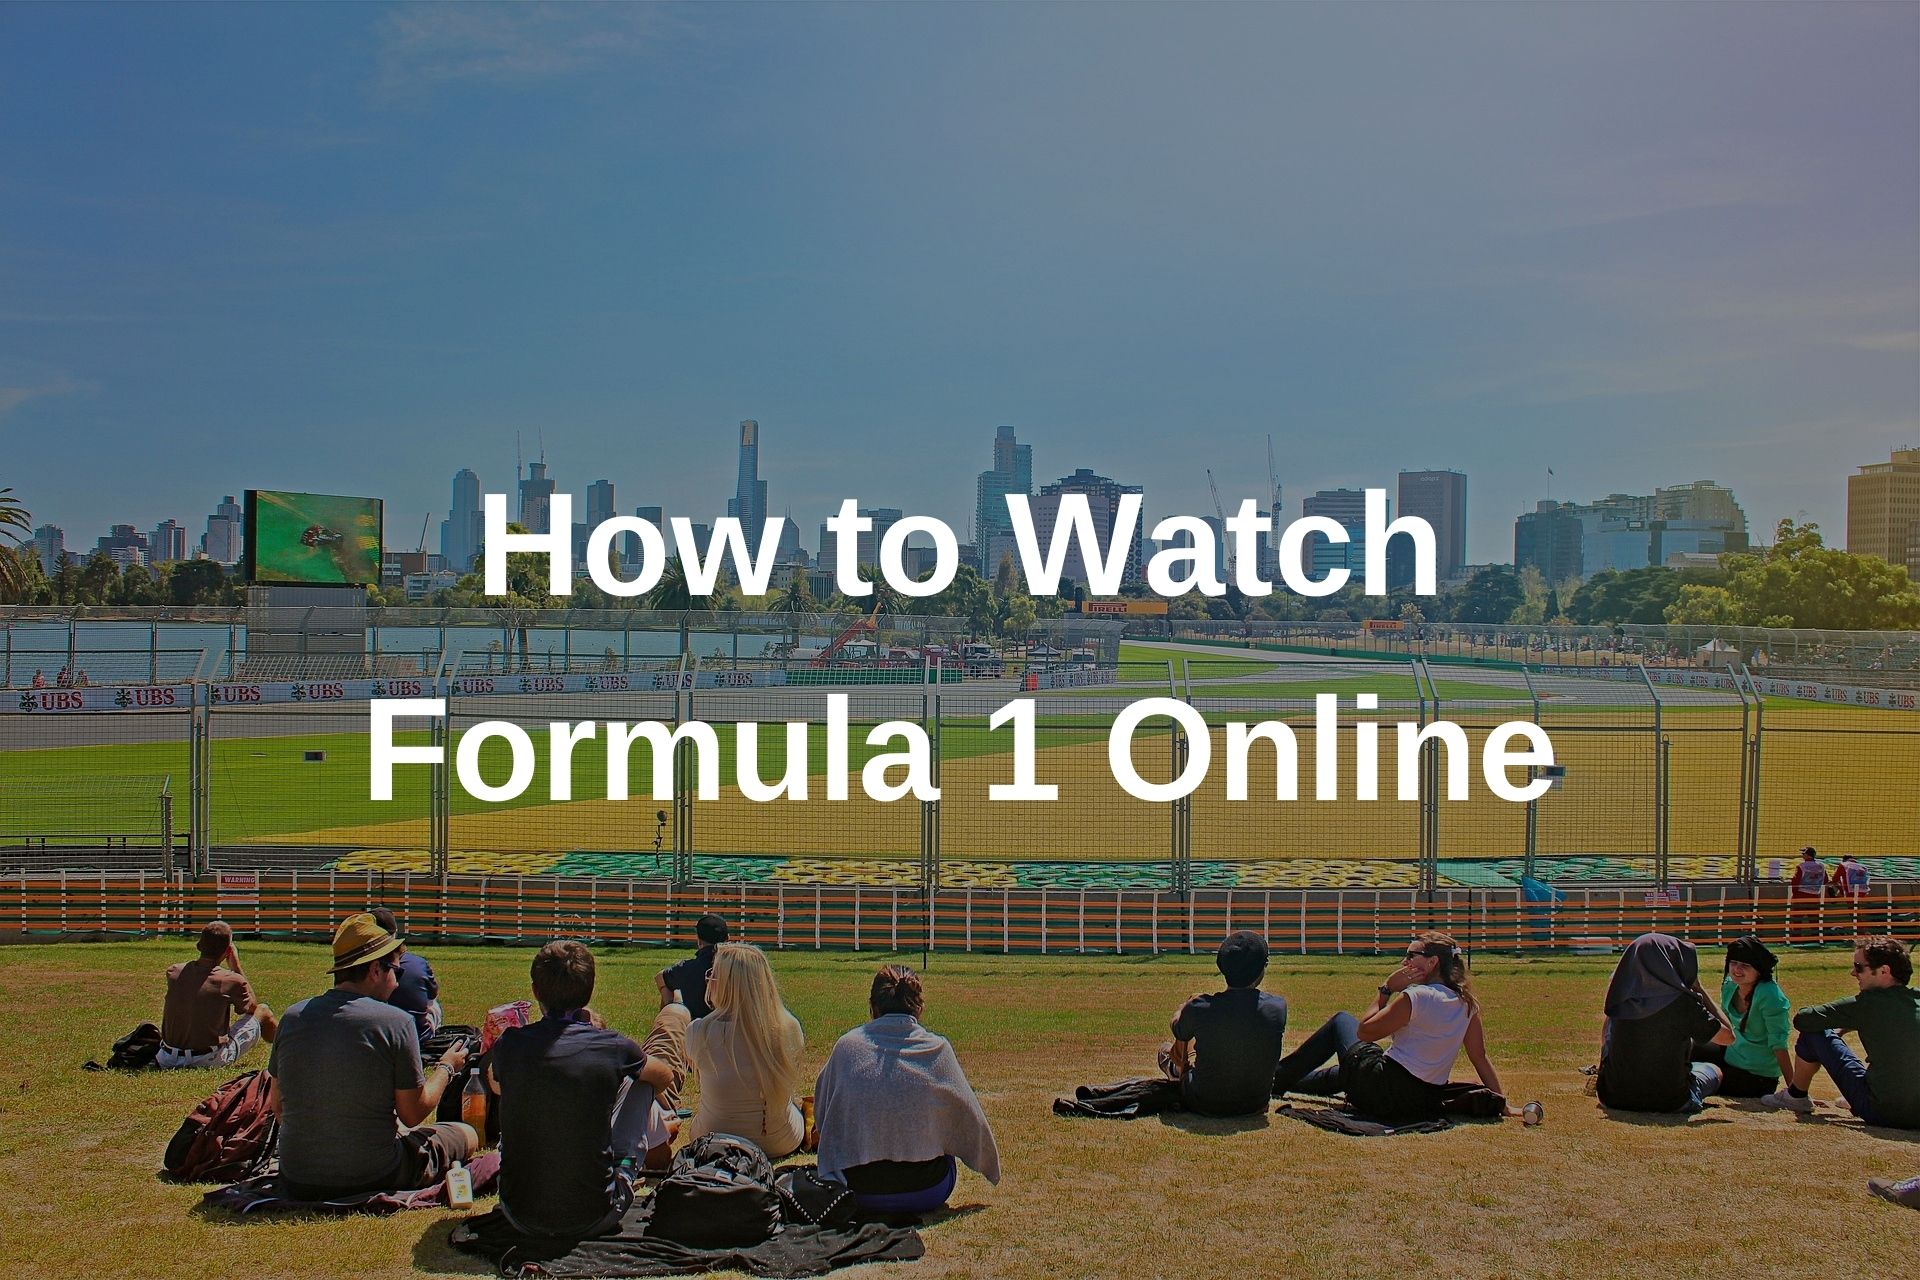 How to watch Formula 1 Online